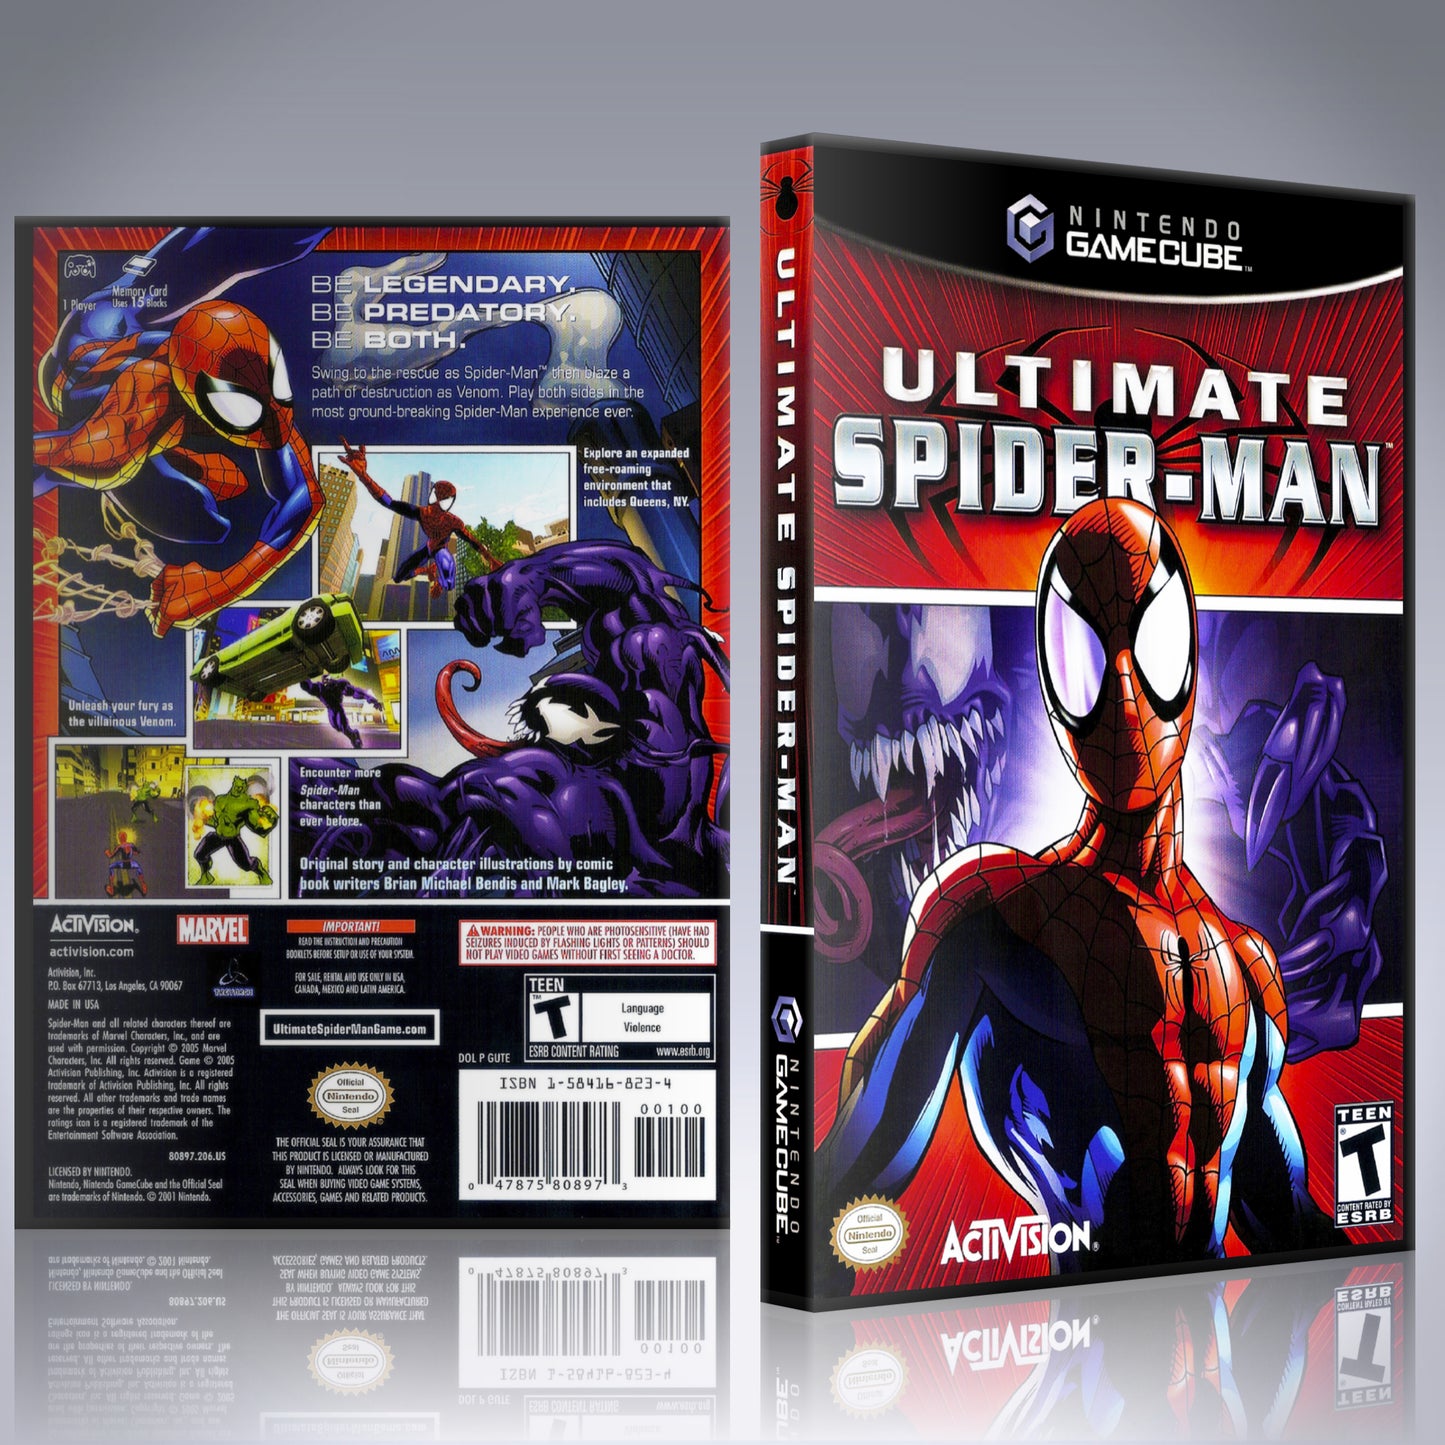 GameCube Replacement Case - NO GAME - Ultimate Spider-Man